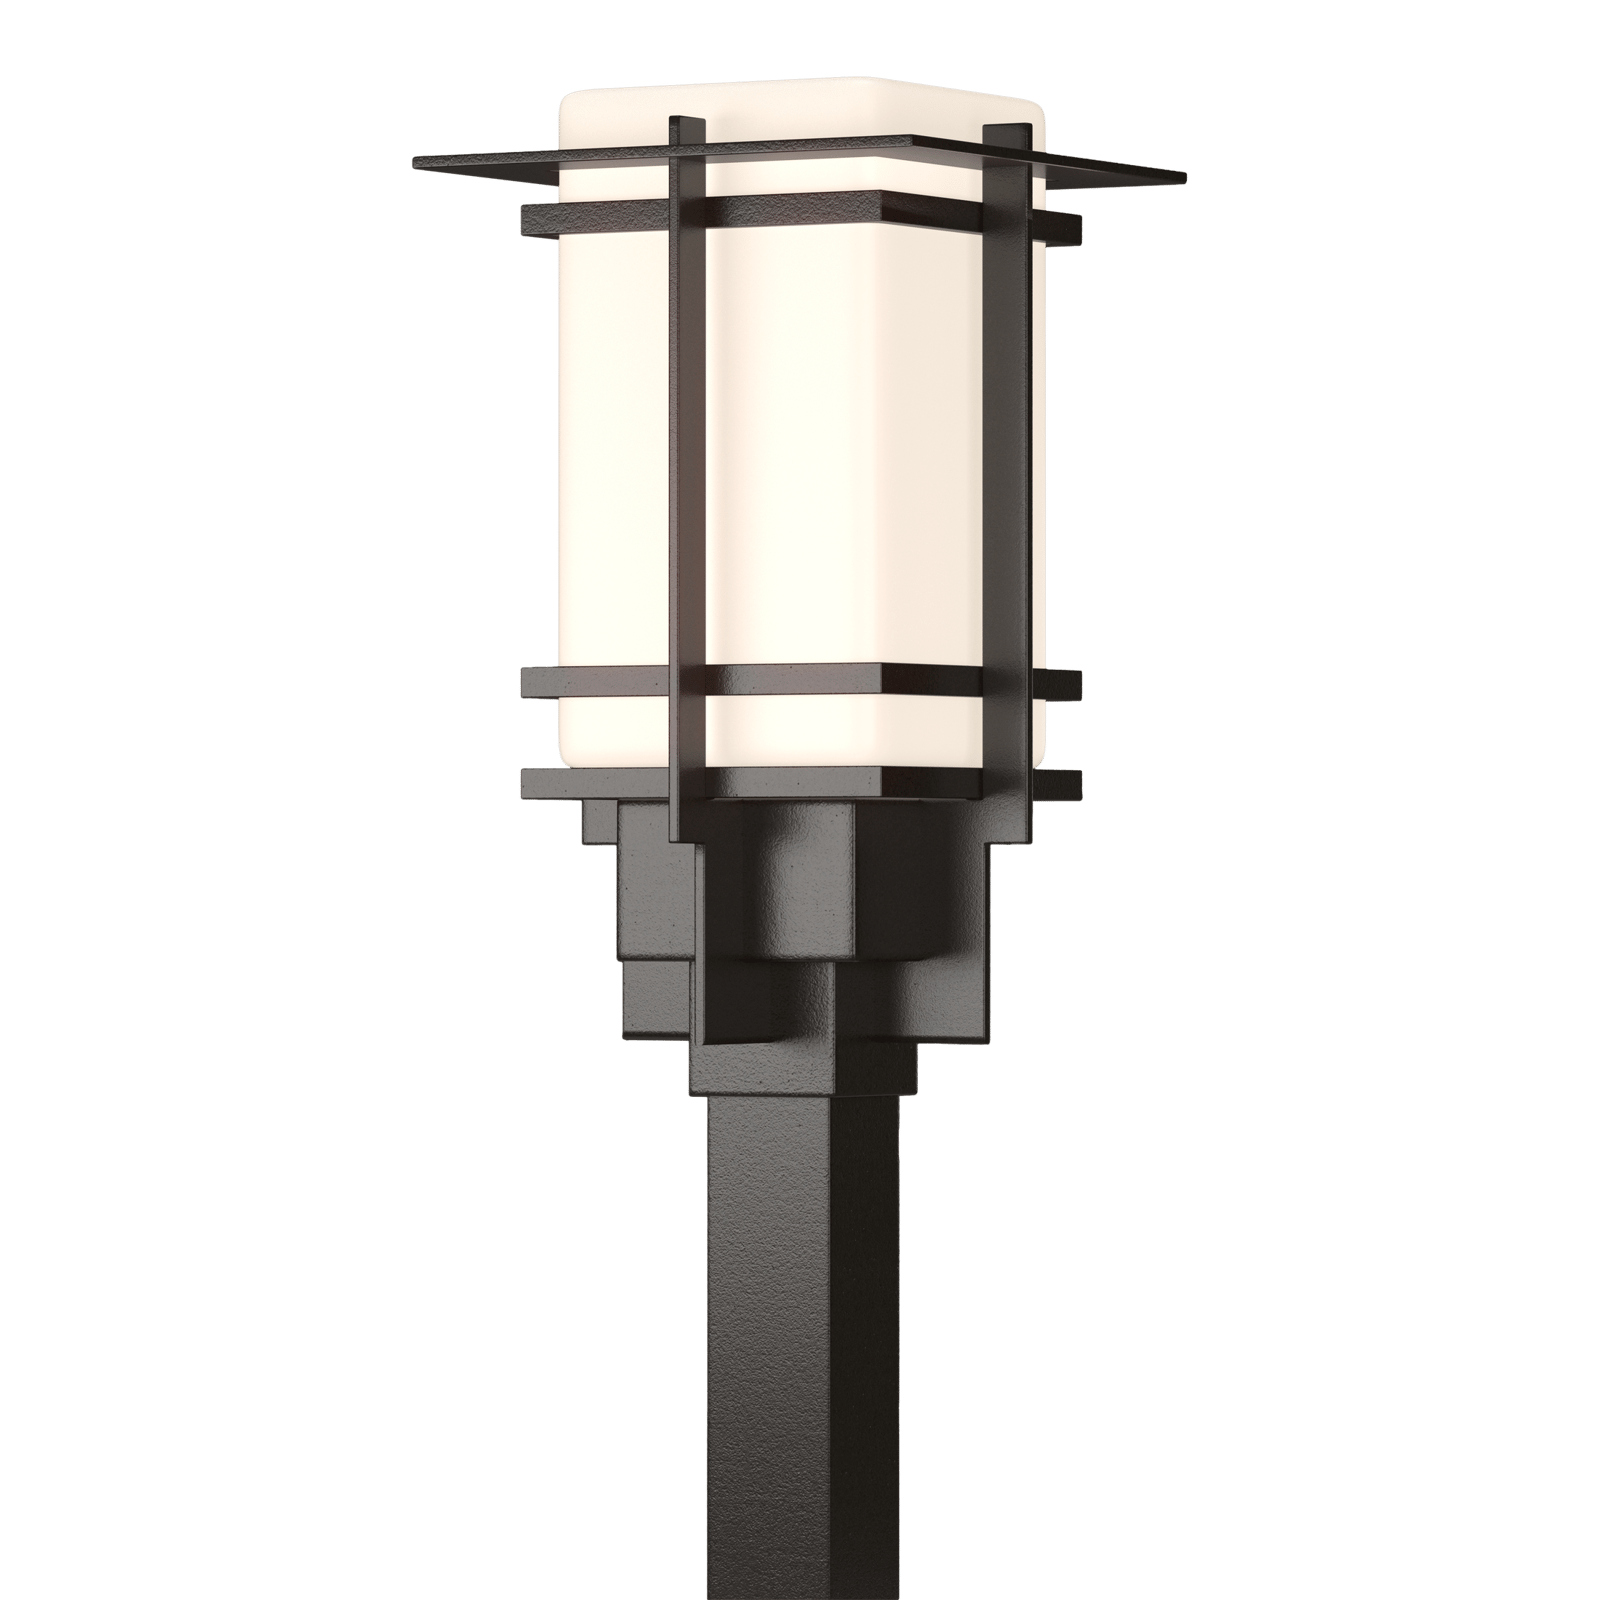 Hubbardton Forge Tourou Outdoor Post Light Outdoor l Post/Pier Mounts Hubbardton Forge Coastal Oil Rubbed Bronze Opal Glass (GG) 